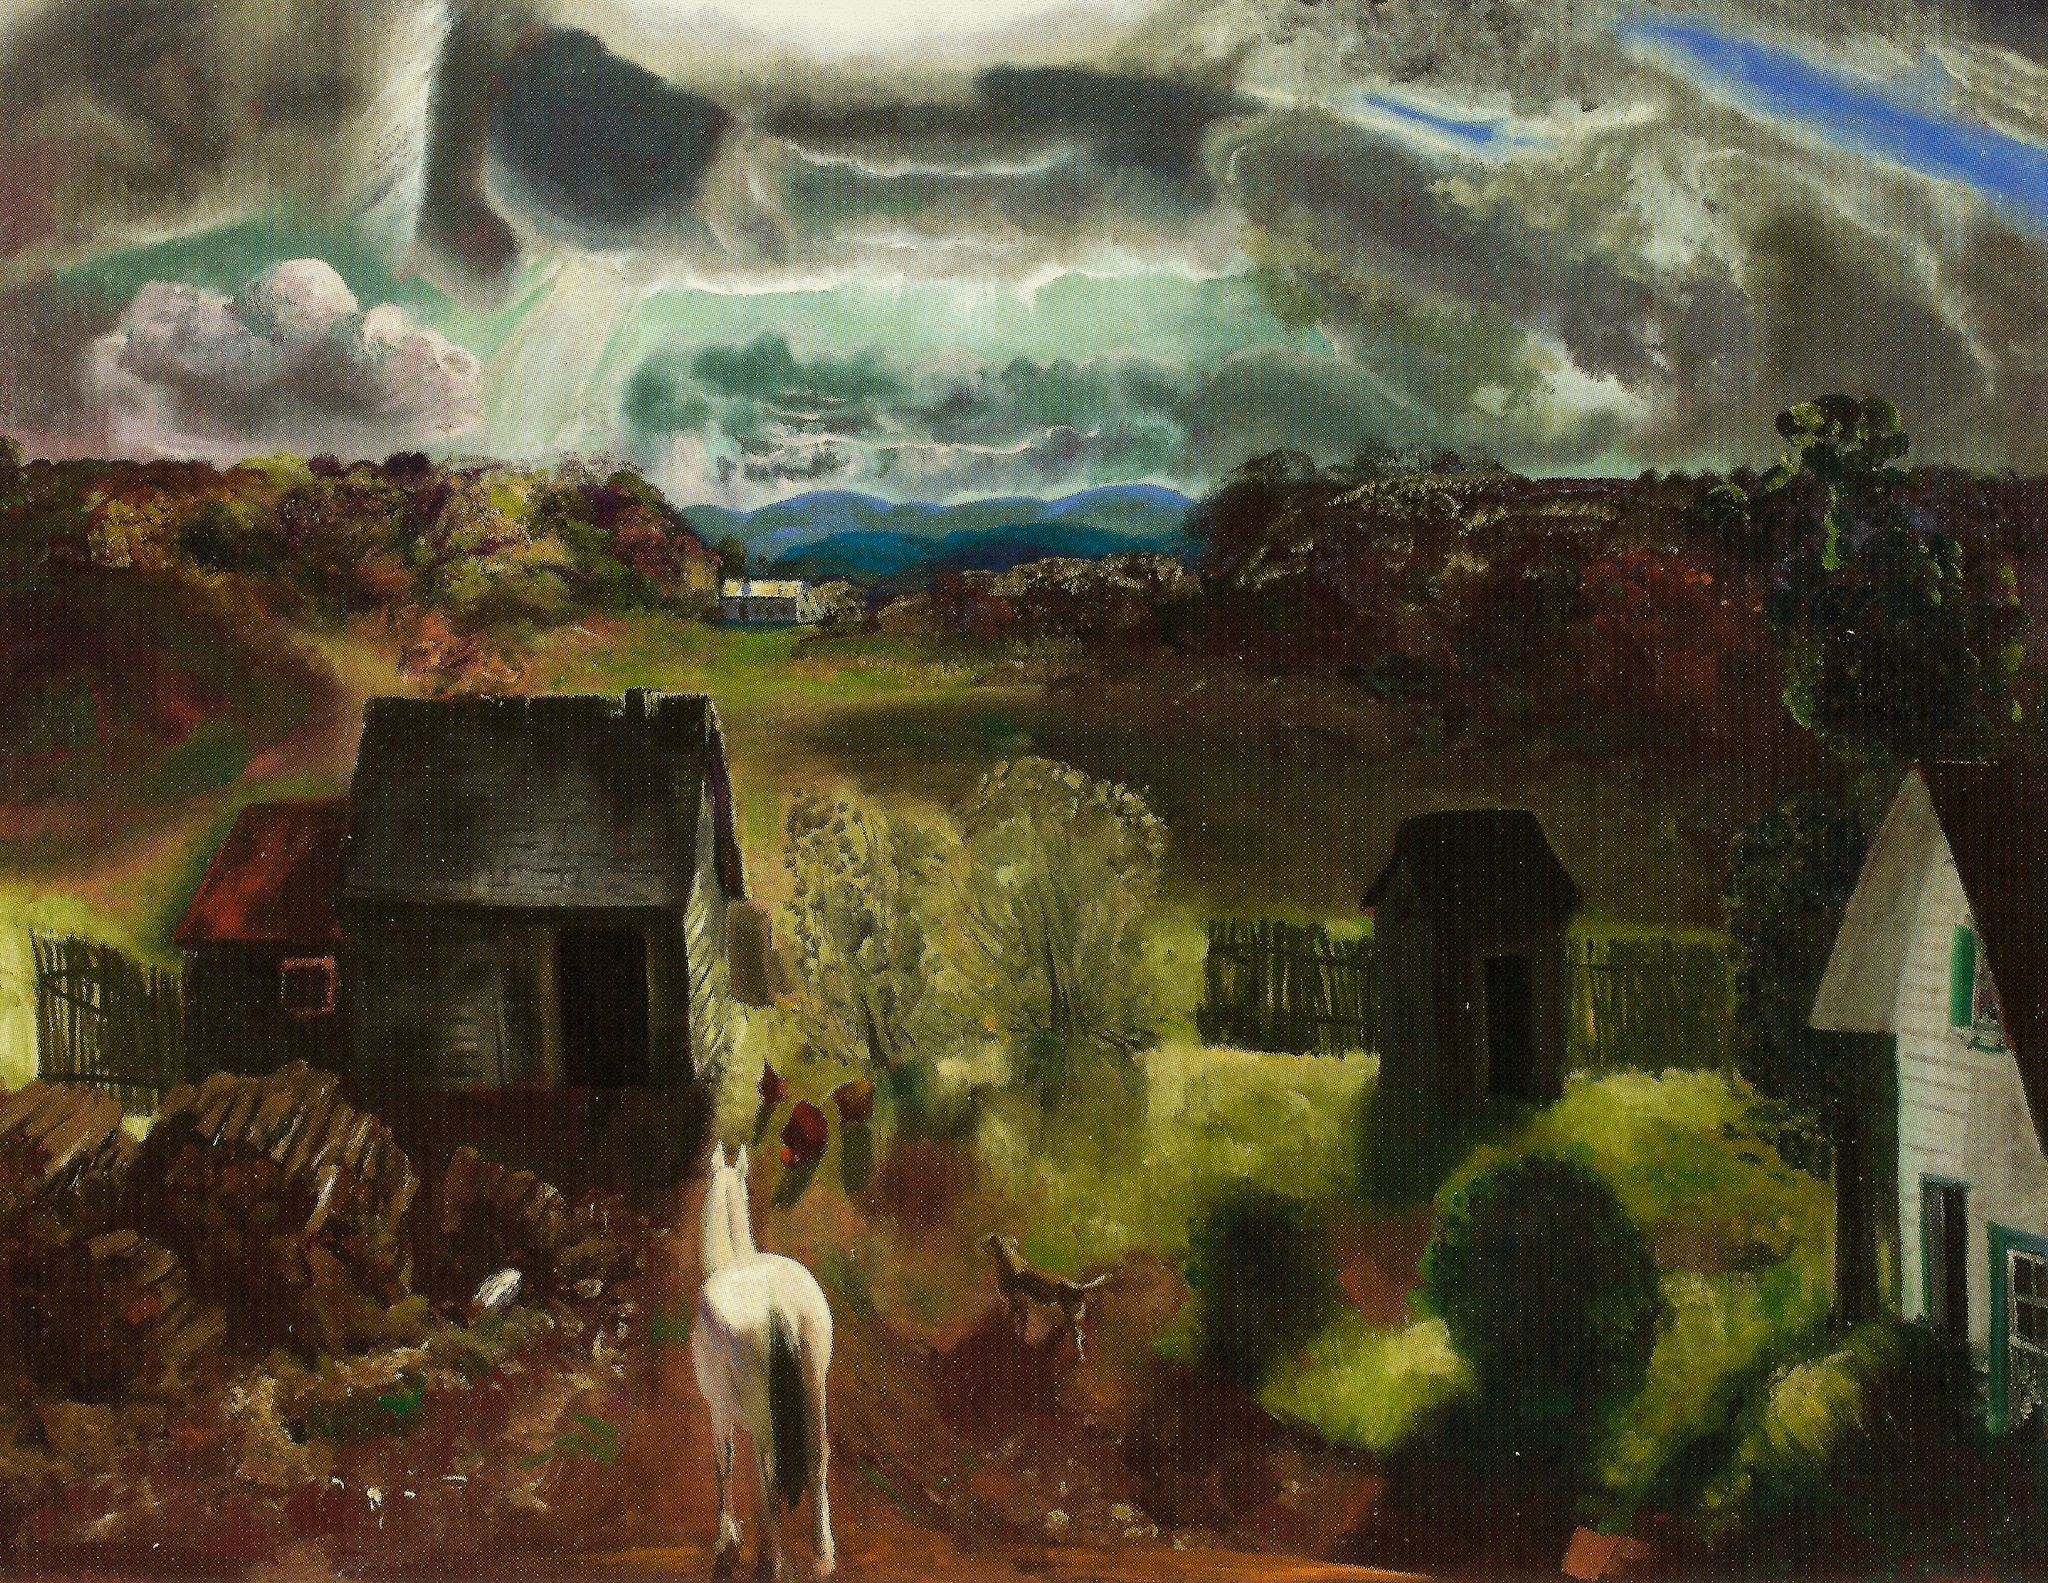 0925_George Bellows_The White Horse 썸네일